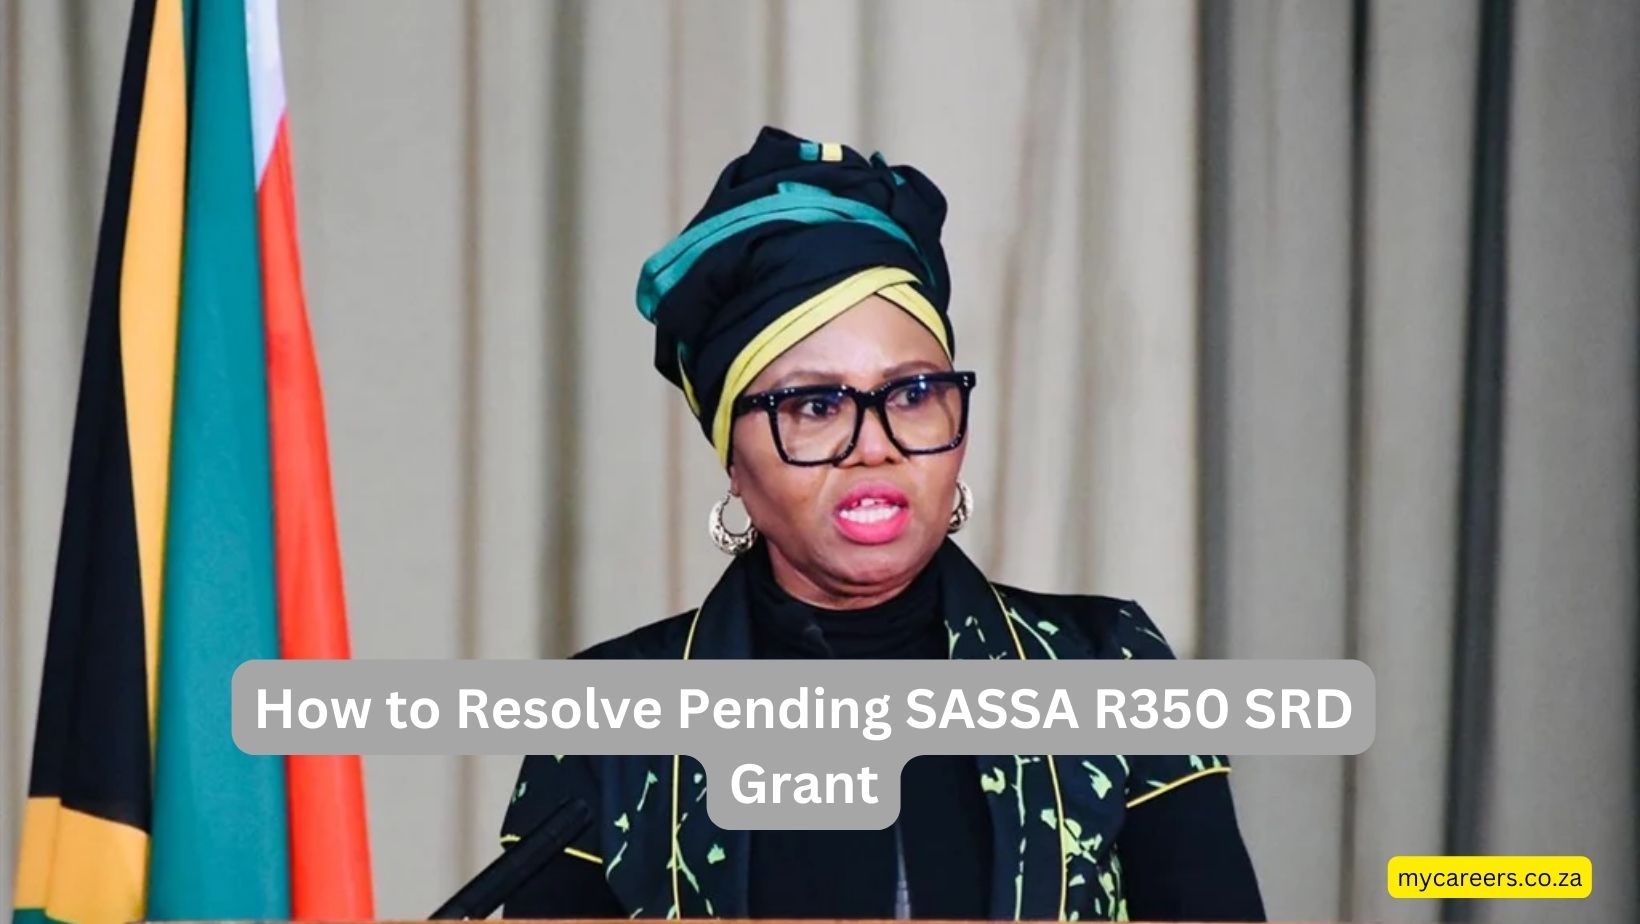 <strong>We’ve Got You Covered: How to Resolve Pending SASSA R350 SRD Grant</strong>